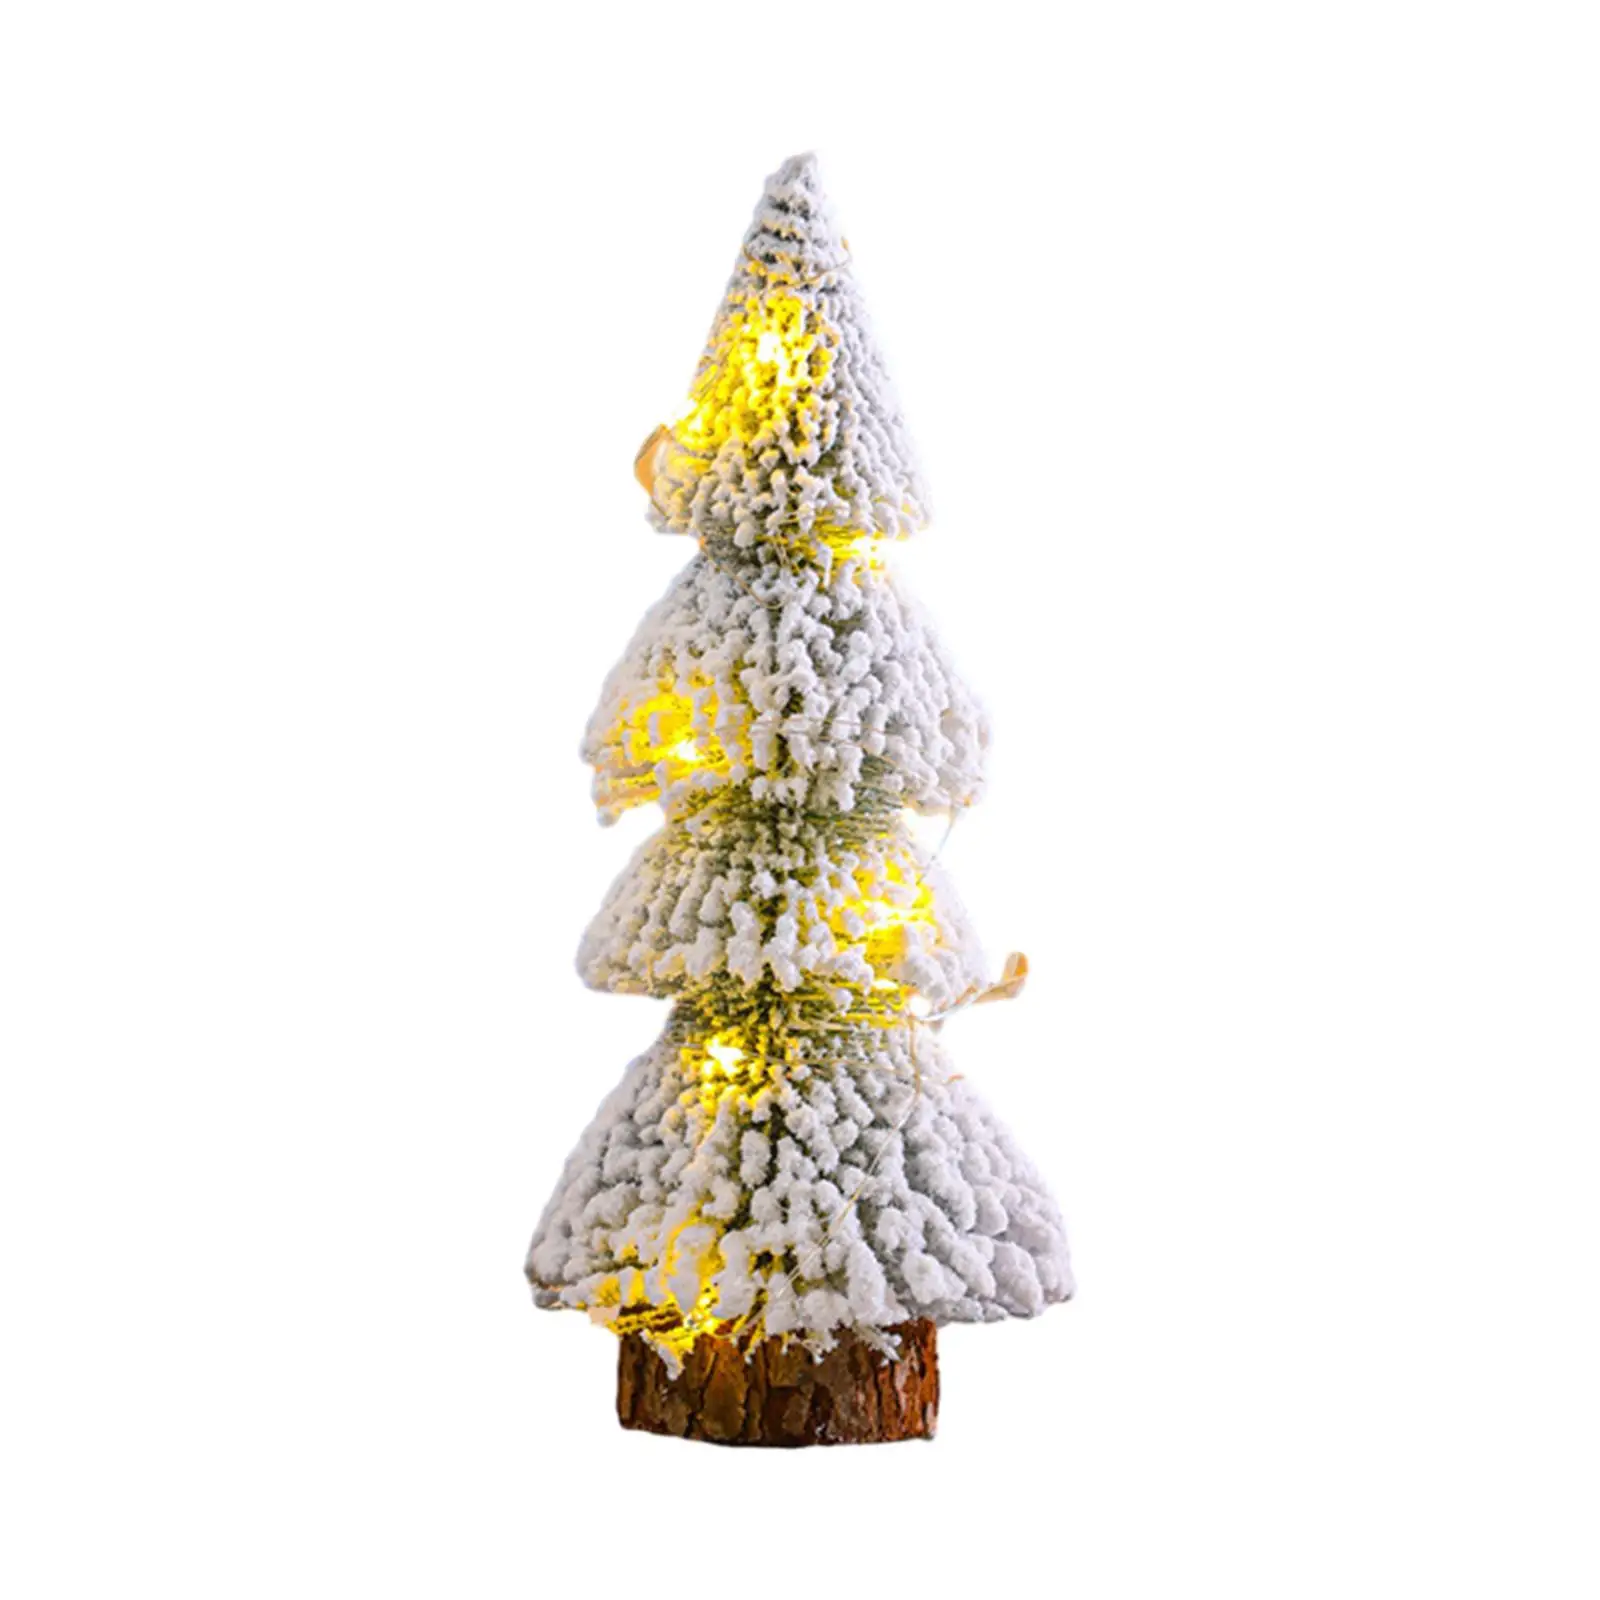 Tabletop Christmas Tree Centerpiece Ornament Party Supplies Mini Xmas Tree for Table Holiday Fireplace Home Decorations